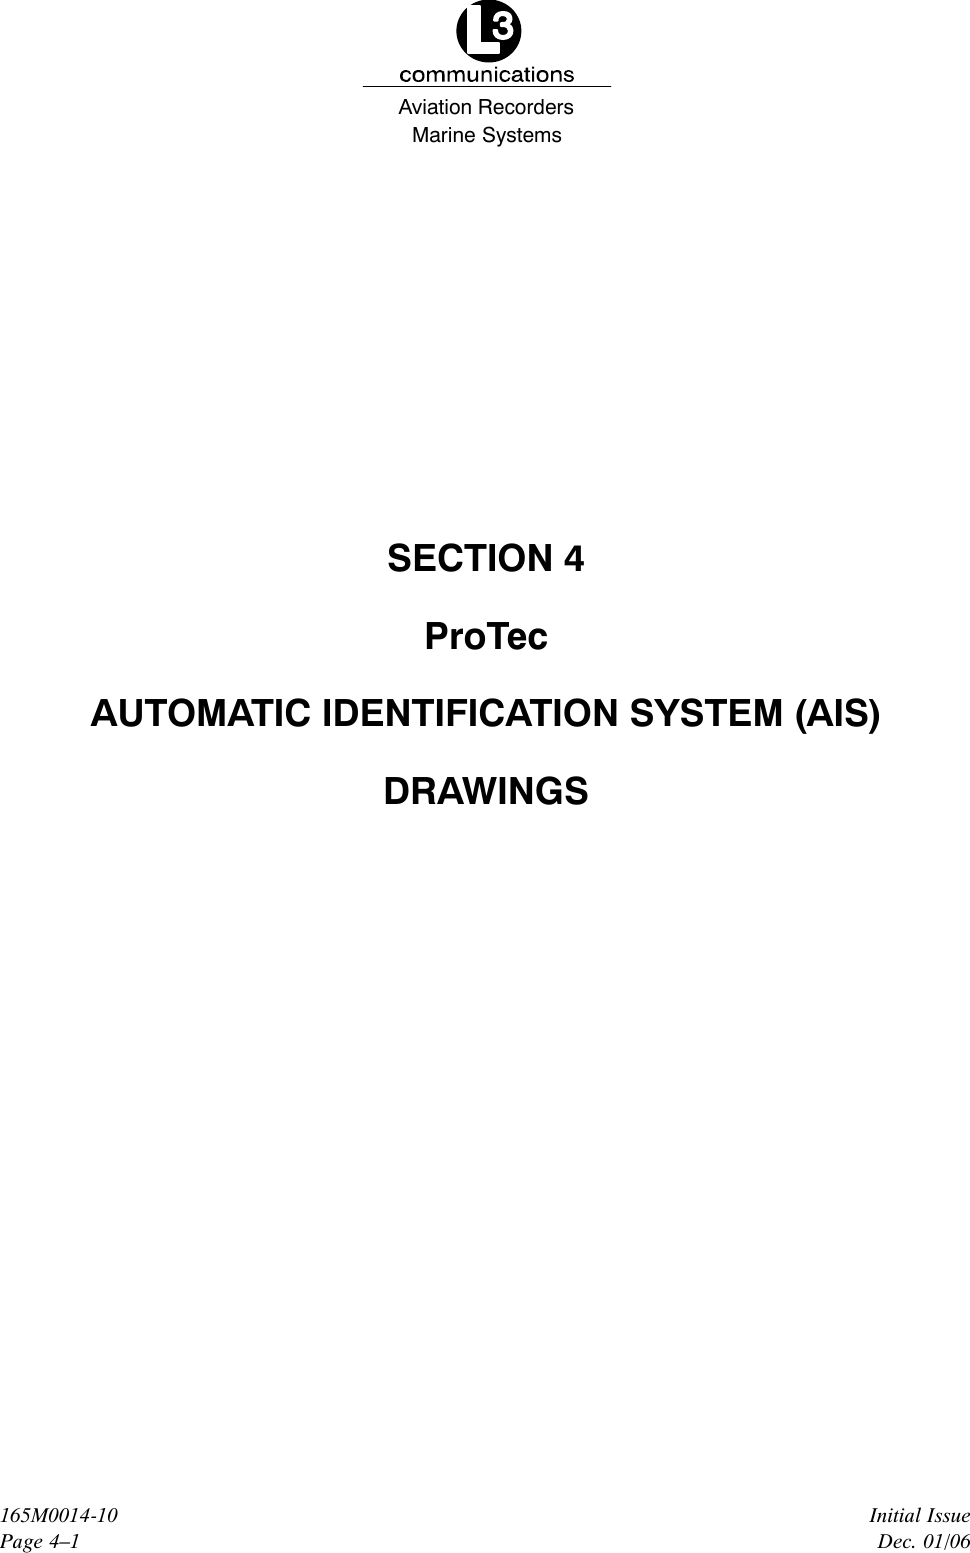 Marine SystemsAviation RecordersInitial IssueDec. 01/06165M0014-10Page 4–1SECTION 4ProTecAUTOMATIC IDENTIFICATION SYSTEM (AIS)DRAWINGS